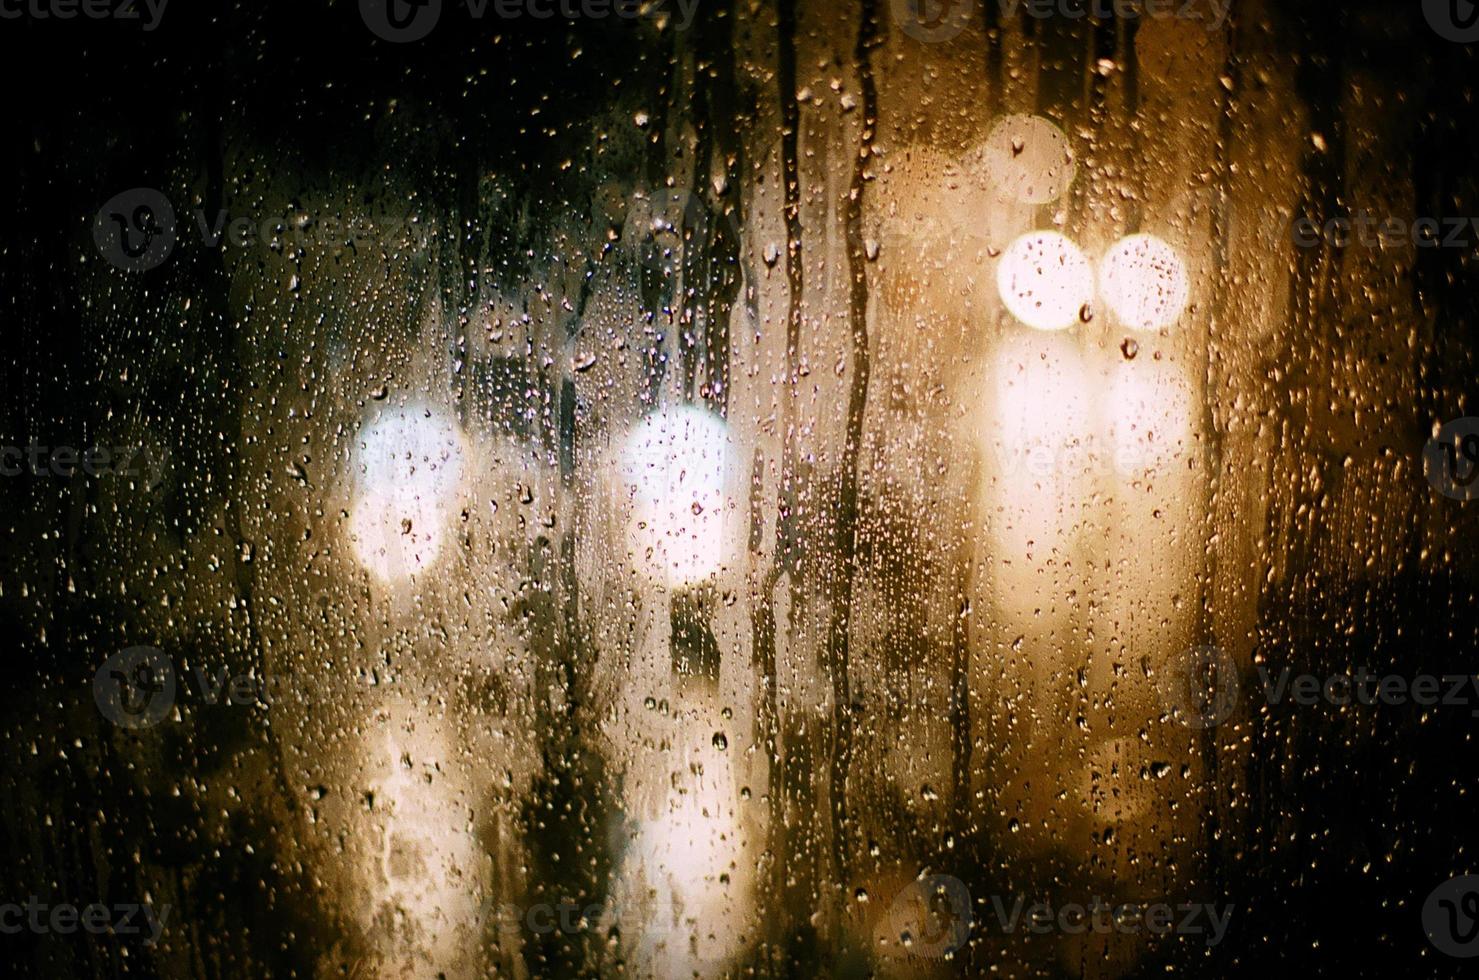 on the glass round reflections of the blurred light of car headlights during the rain. photo